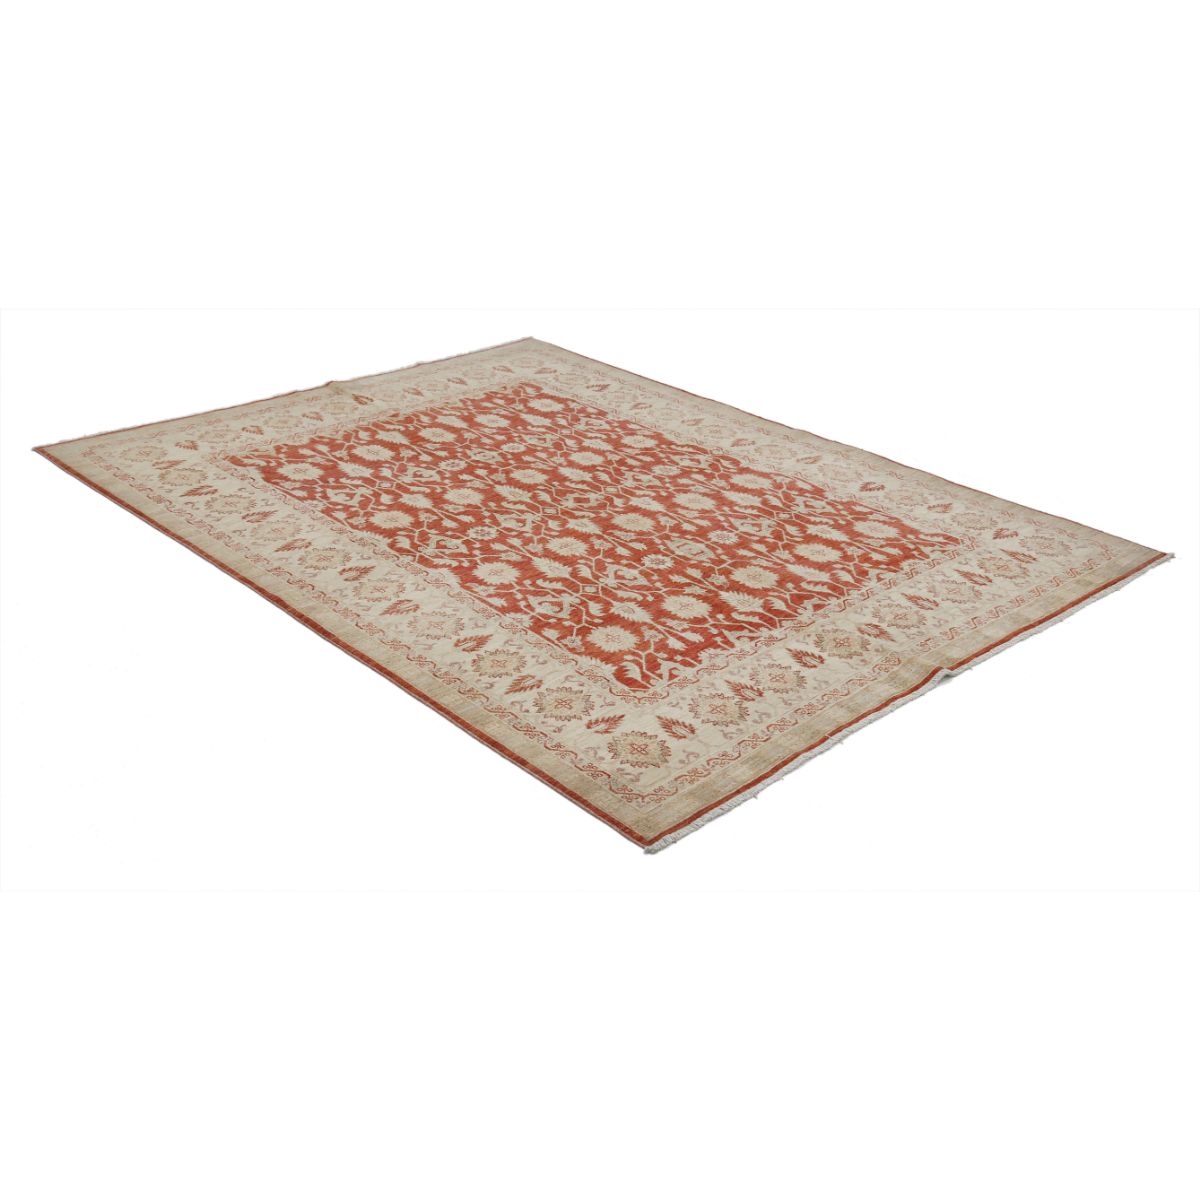 Ziegler 6'3" X 7'10" Wool Hand-Knotted Rug